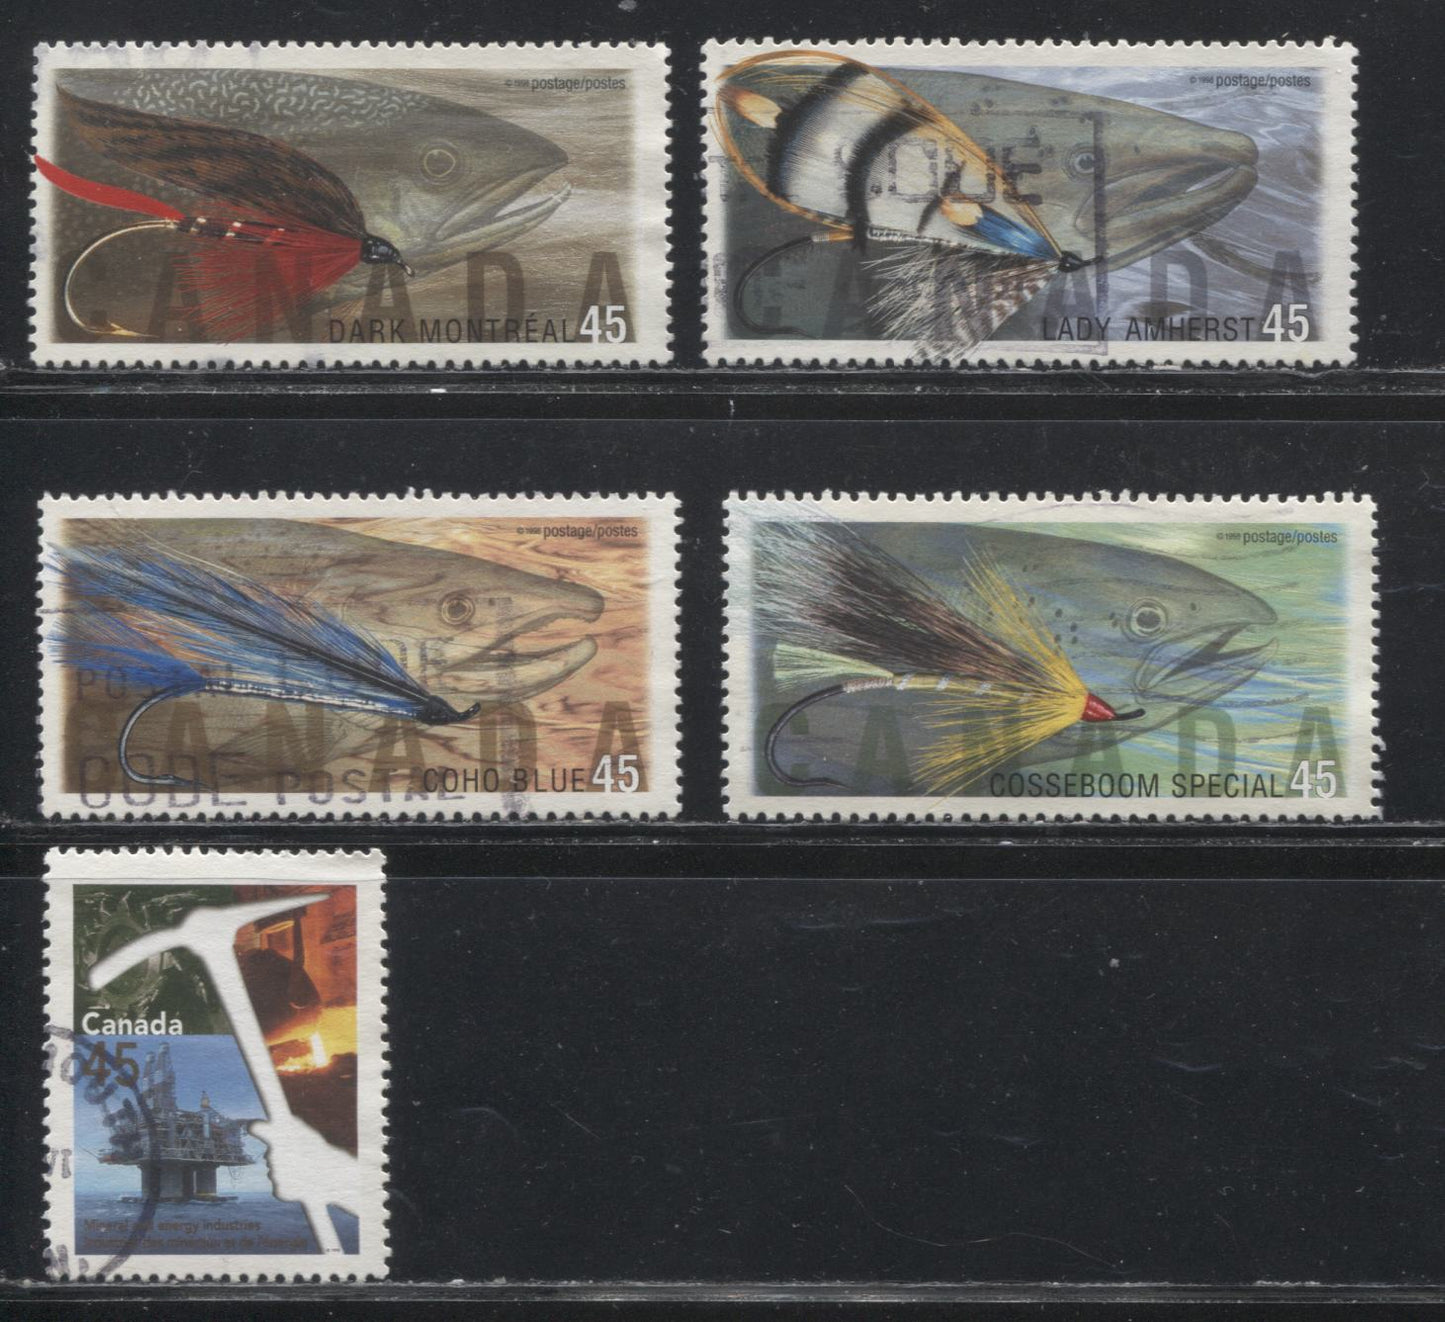 Lot 266 Canada #1710-1734 45c Multicoloured Stamps 1998 Birds - Canals Issue, VF Used Singles Mostly All With In-Period CDS Cancels